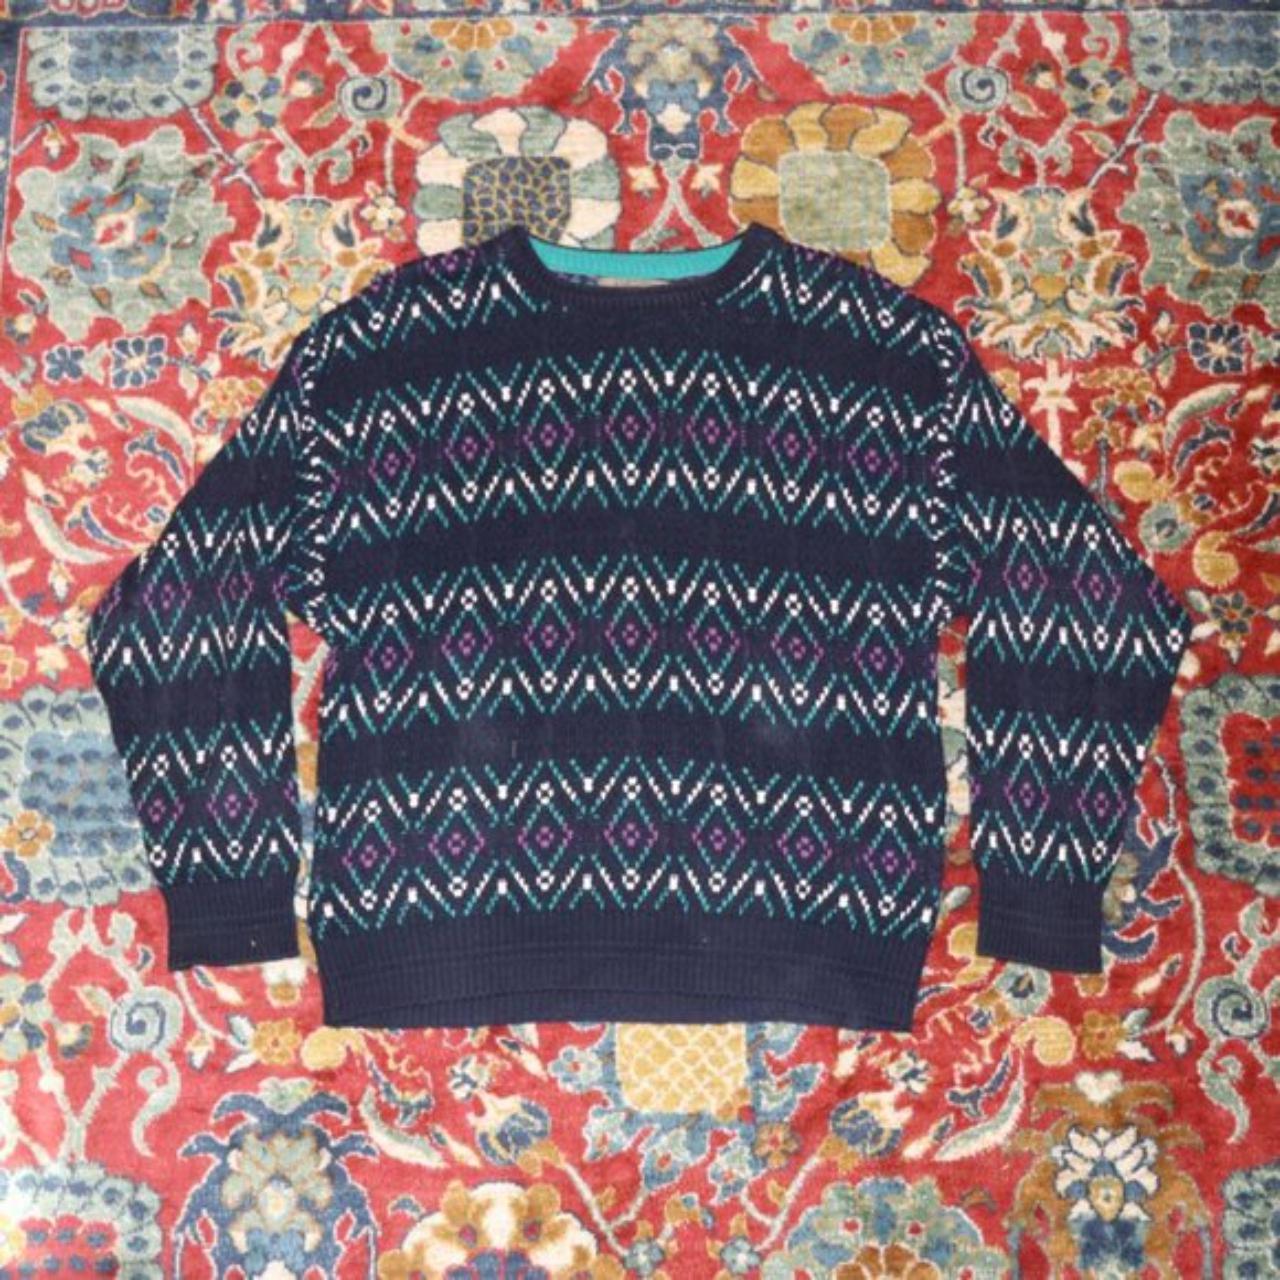 80s vintage oversized patterned sweater. this is - Depop